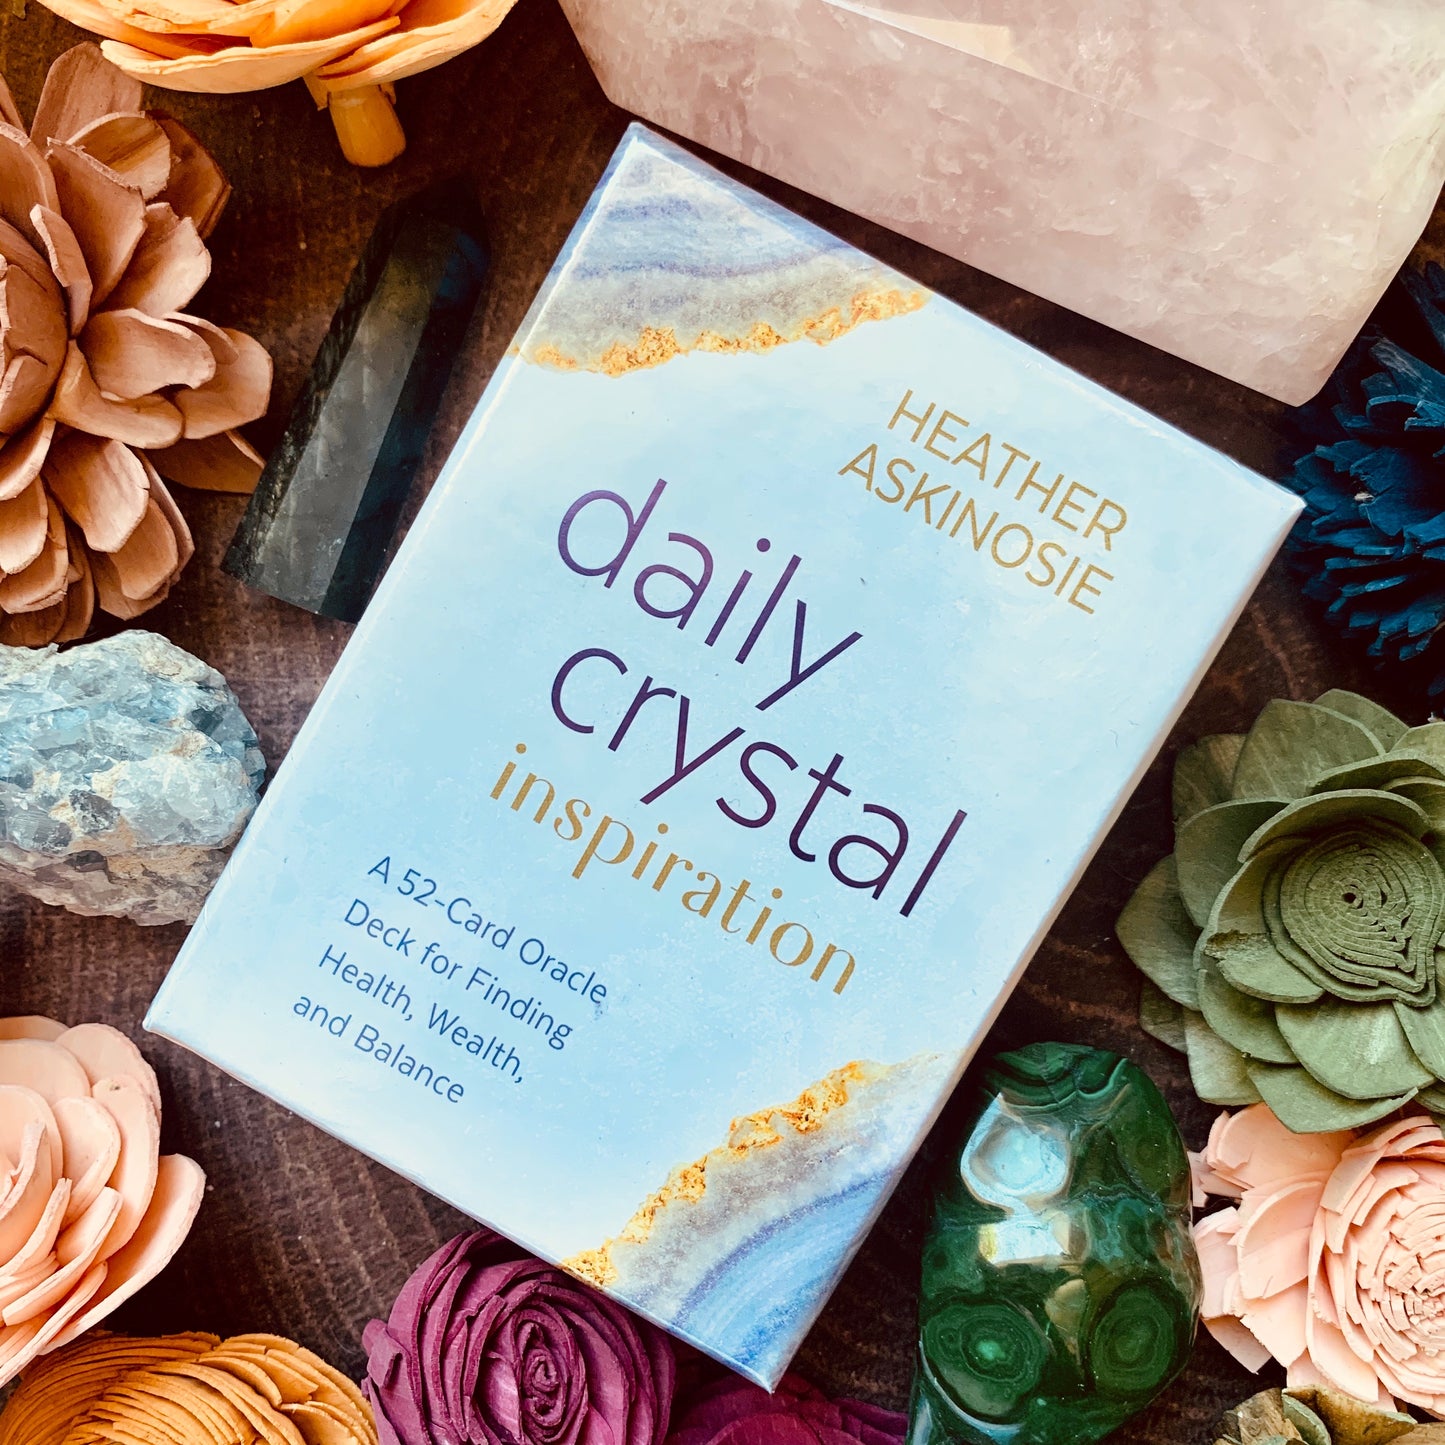 Daily Crystal Inspiration Oracle Card Deck